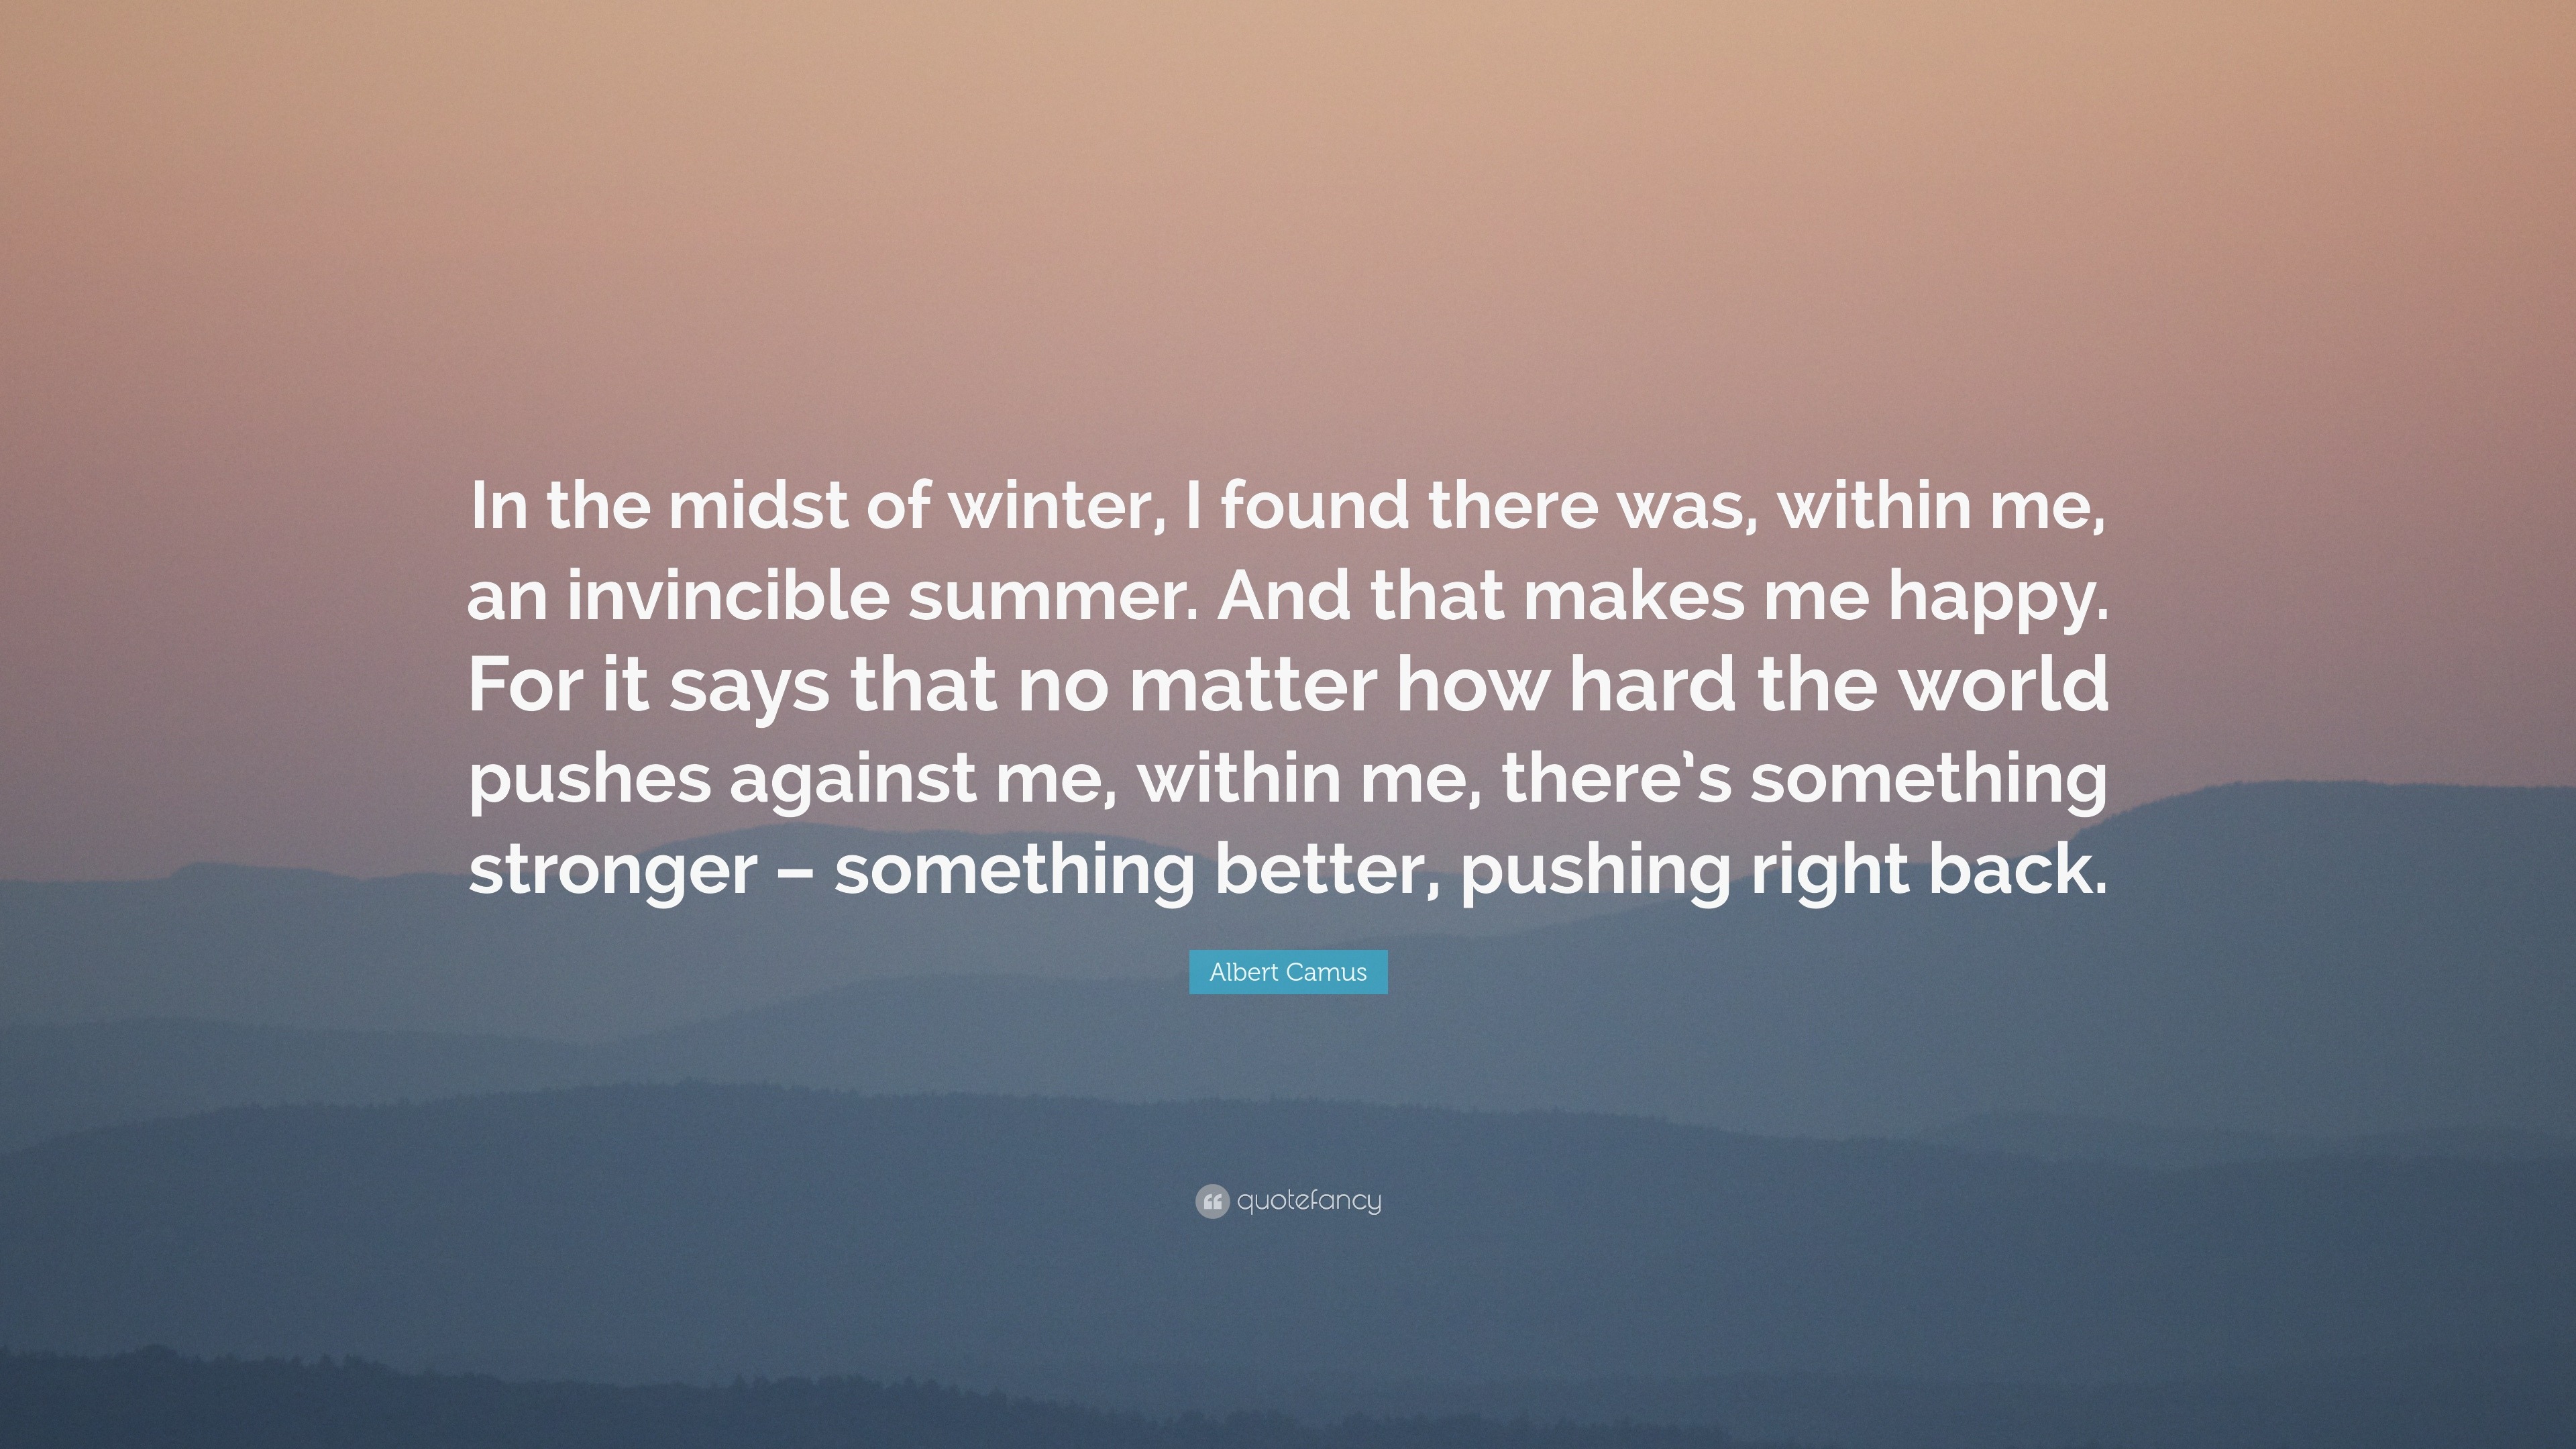 65742 Albert Camus Quote In the midst of winter I found there was within